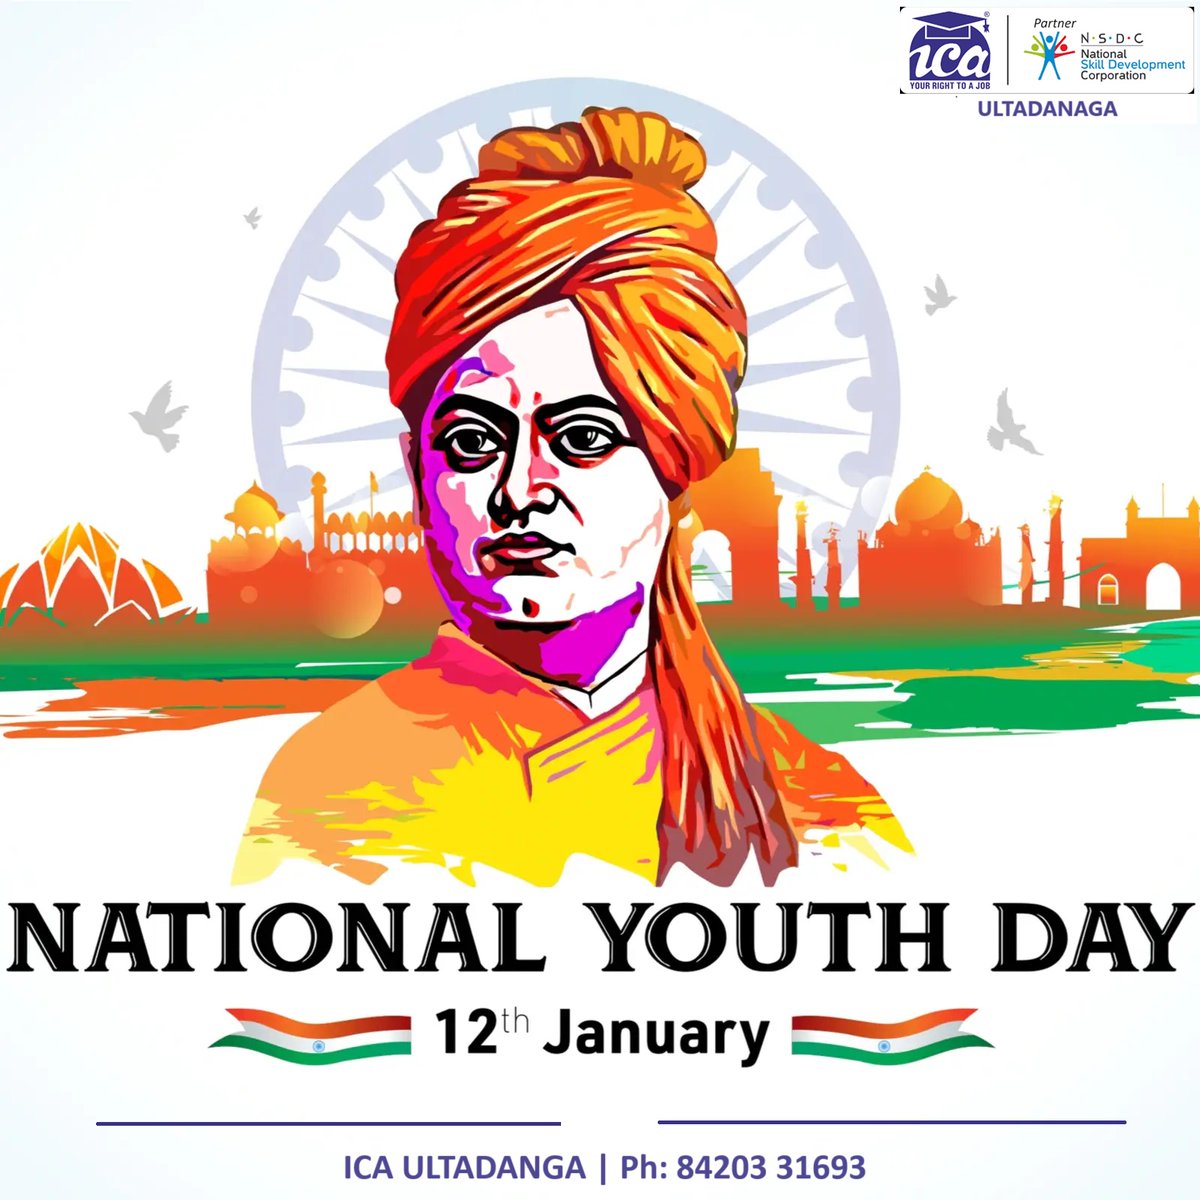 Every risk leads to a new chance to grow, however, it depends on how you choose to see it.  Wishing you a very Happy National Youth Day!
#icaultadanga #ultadangaica #icakankurgachi #IAmJobReady #LearnWithICA #ICAJobGuaranteeCourse  #NationalYouthDay #SwamiVivekananda #ChangeMaker